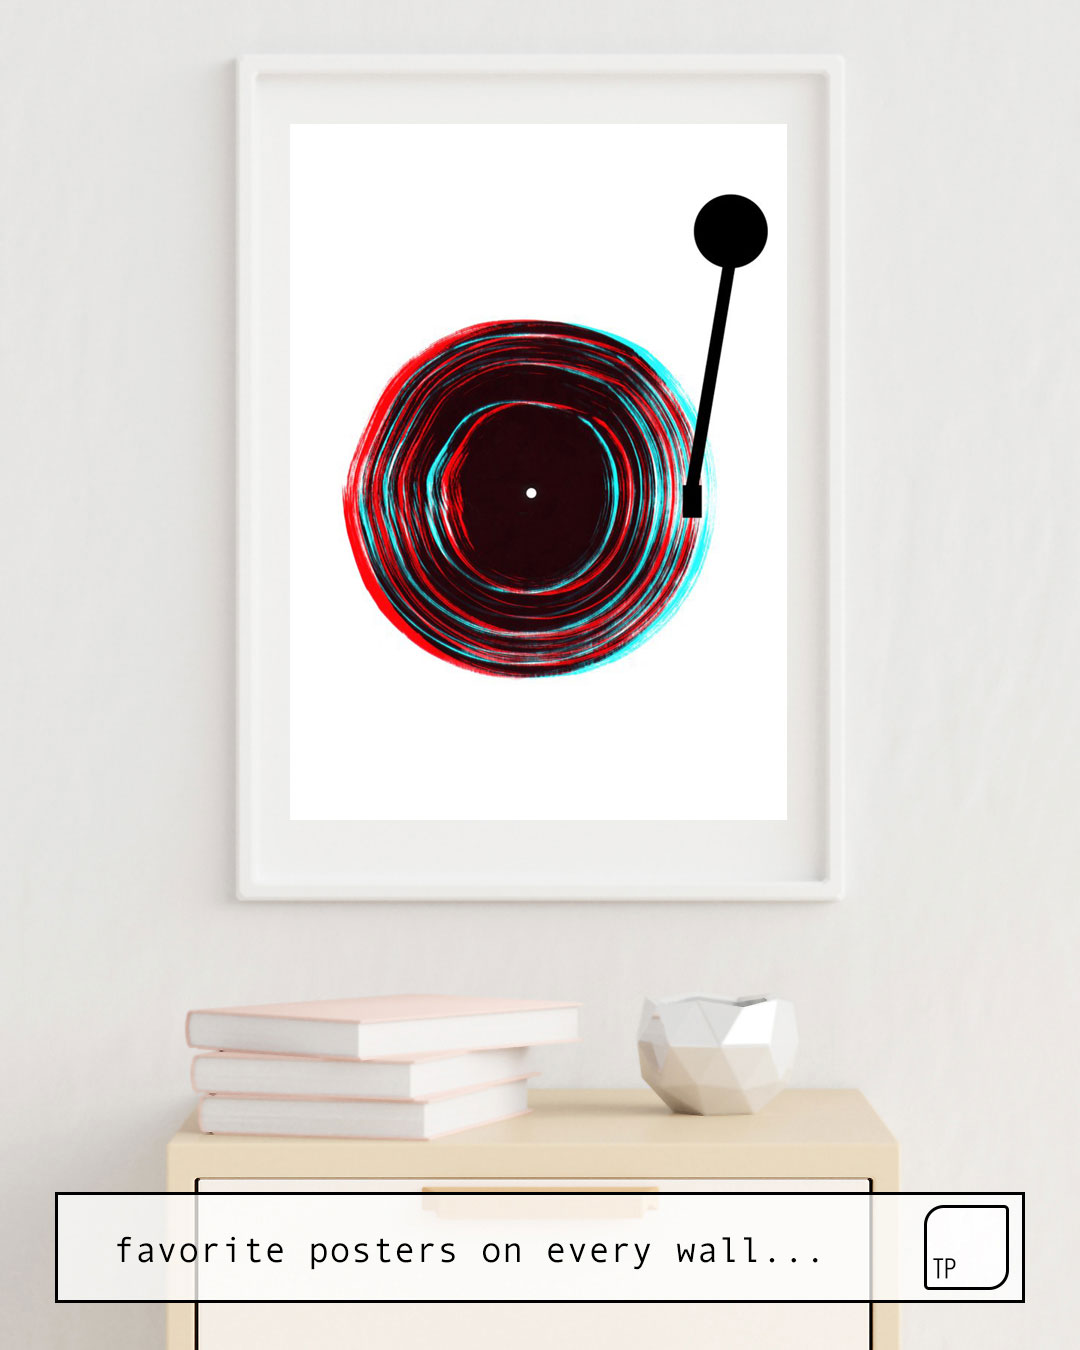 Poster | VINYL PLAYER by Andreas Lie